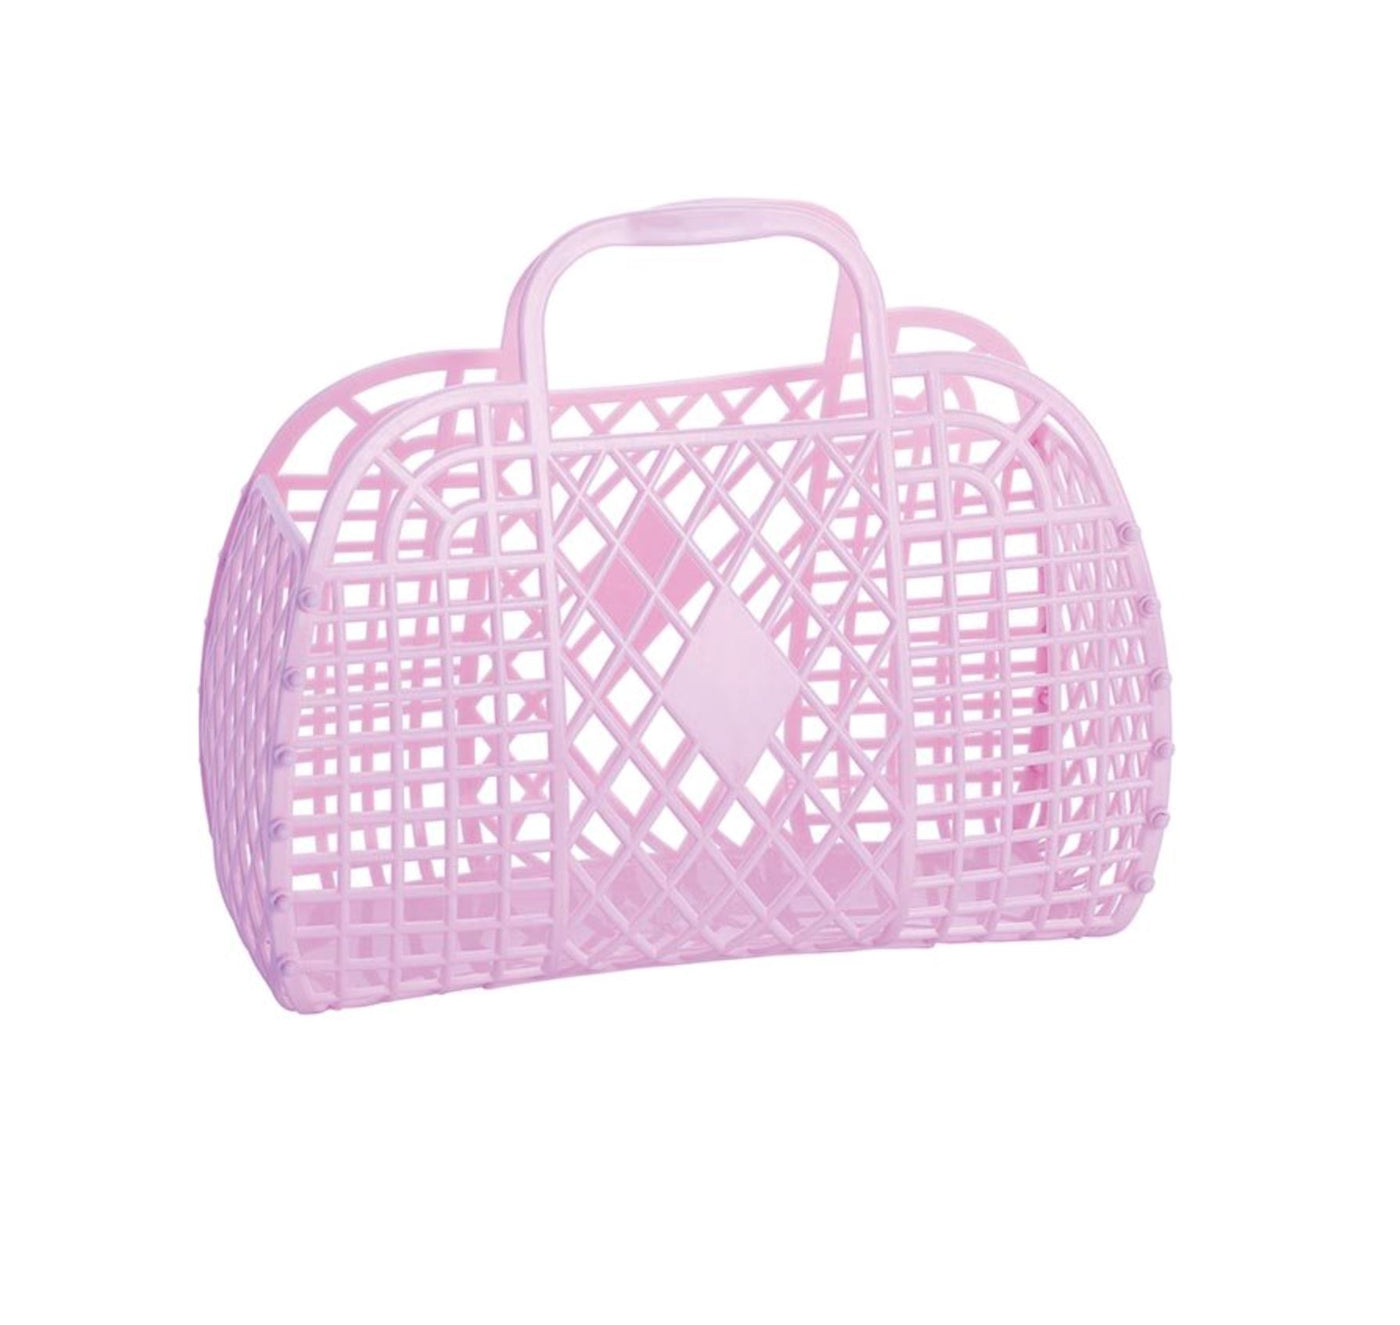 Sun Jellies Retro Basket Small - Lilac Basket IS Gifts 